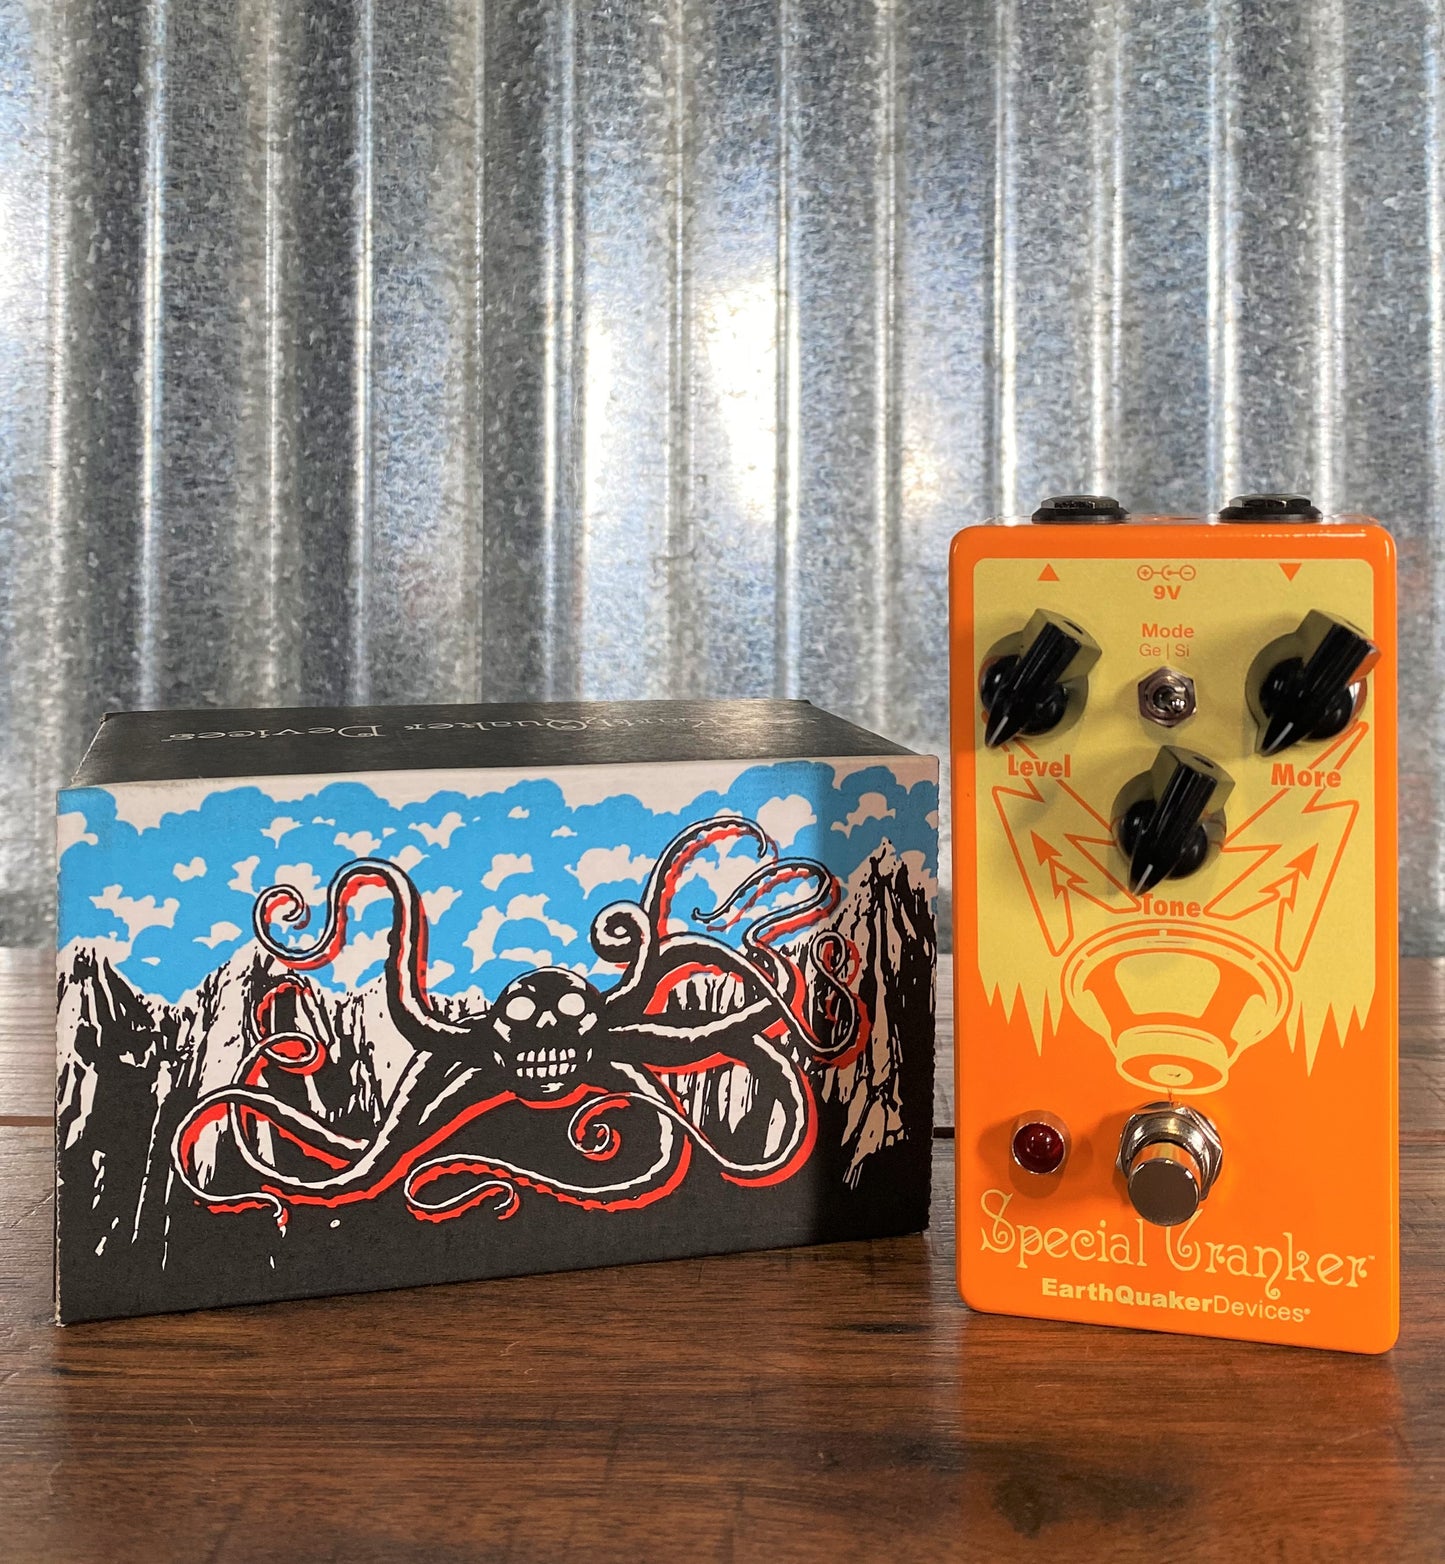 Earthquaker Devices EQD Special Cranker Overdrive Guitar Effect Pedal